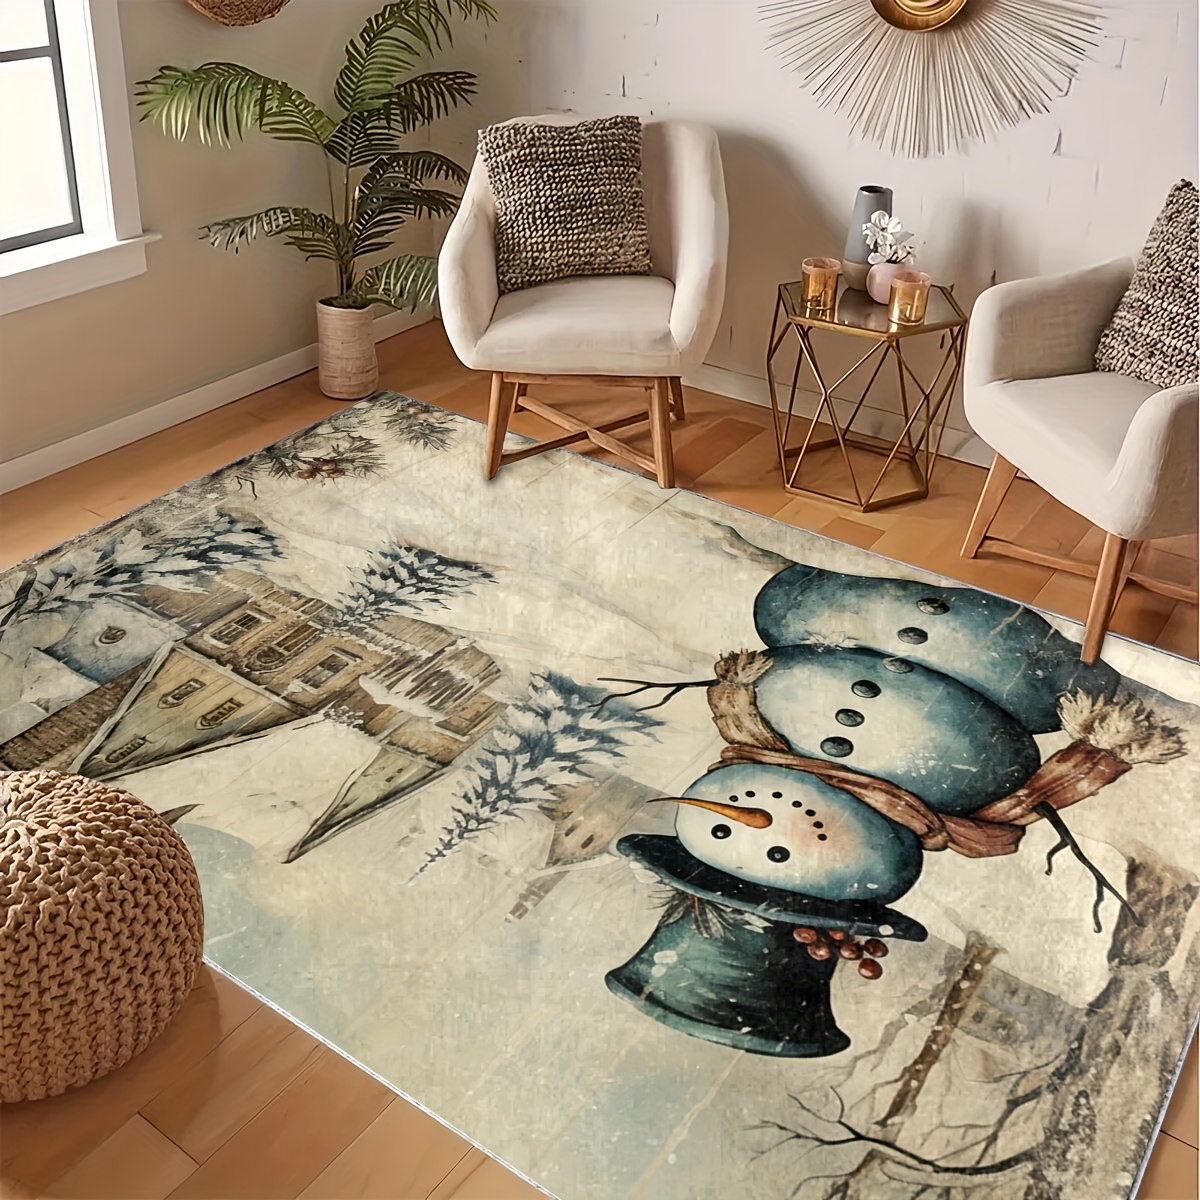 Elk Area Rugs 3x4 ft - Christmas Rug for Living Room Bedroom Decor, Printed  Floor Small Rug for Dining Room Home Decorative, Soft & Non-Slip 